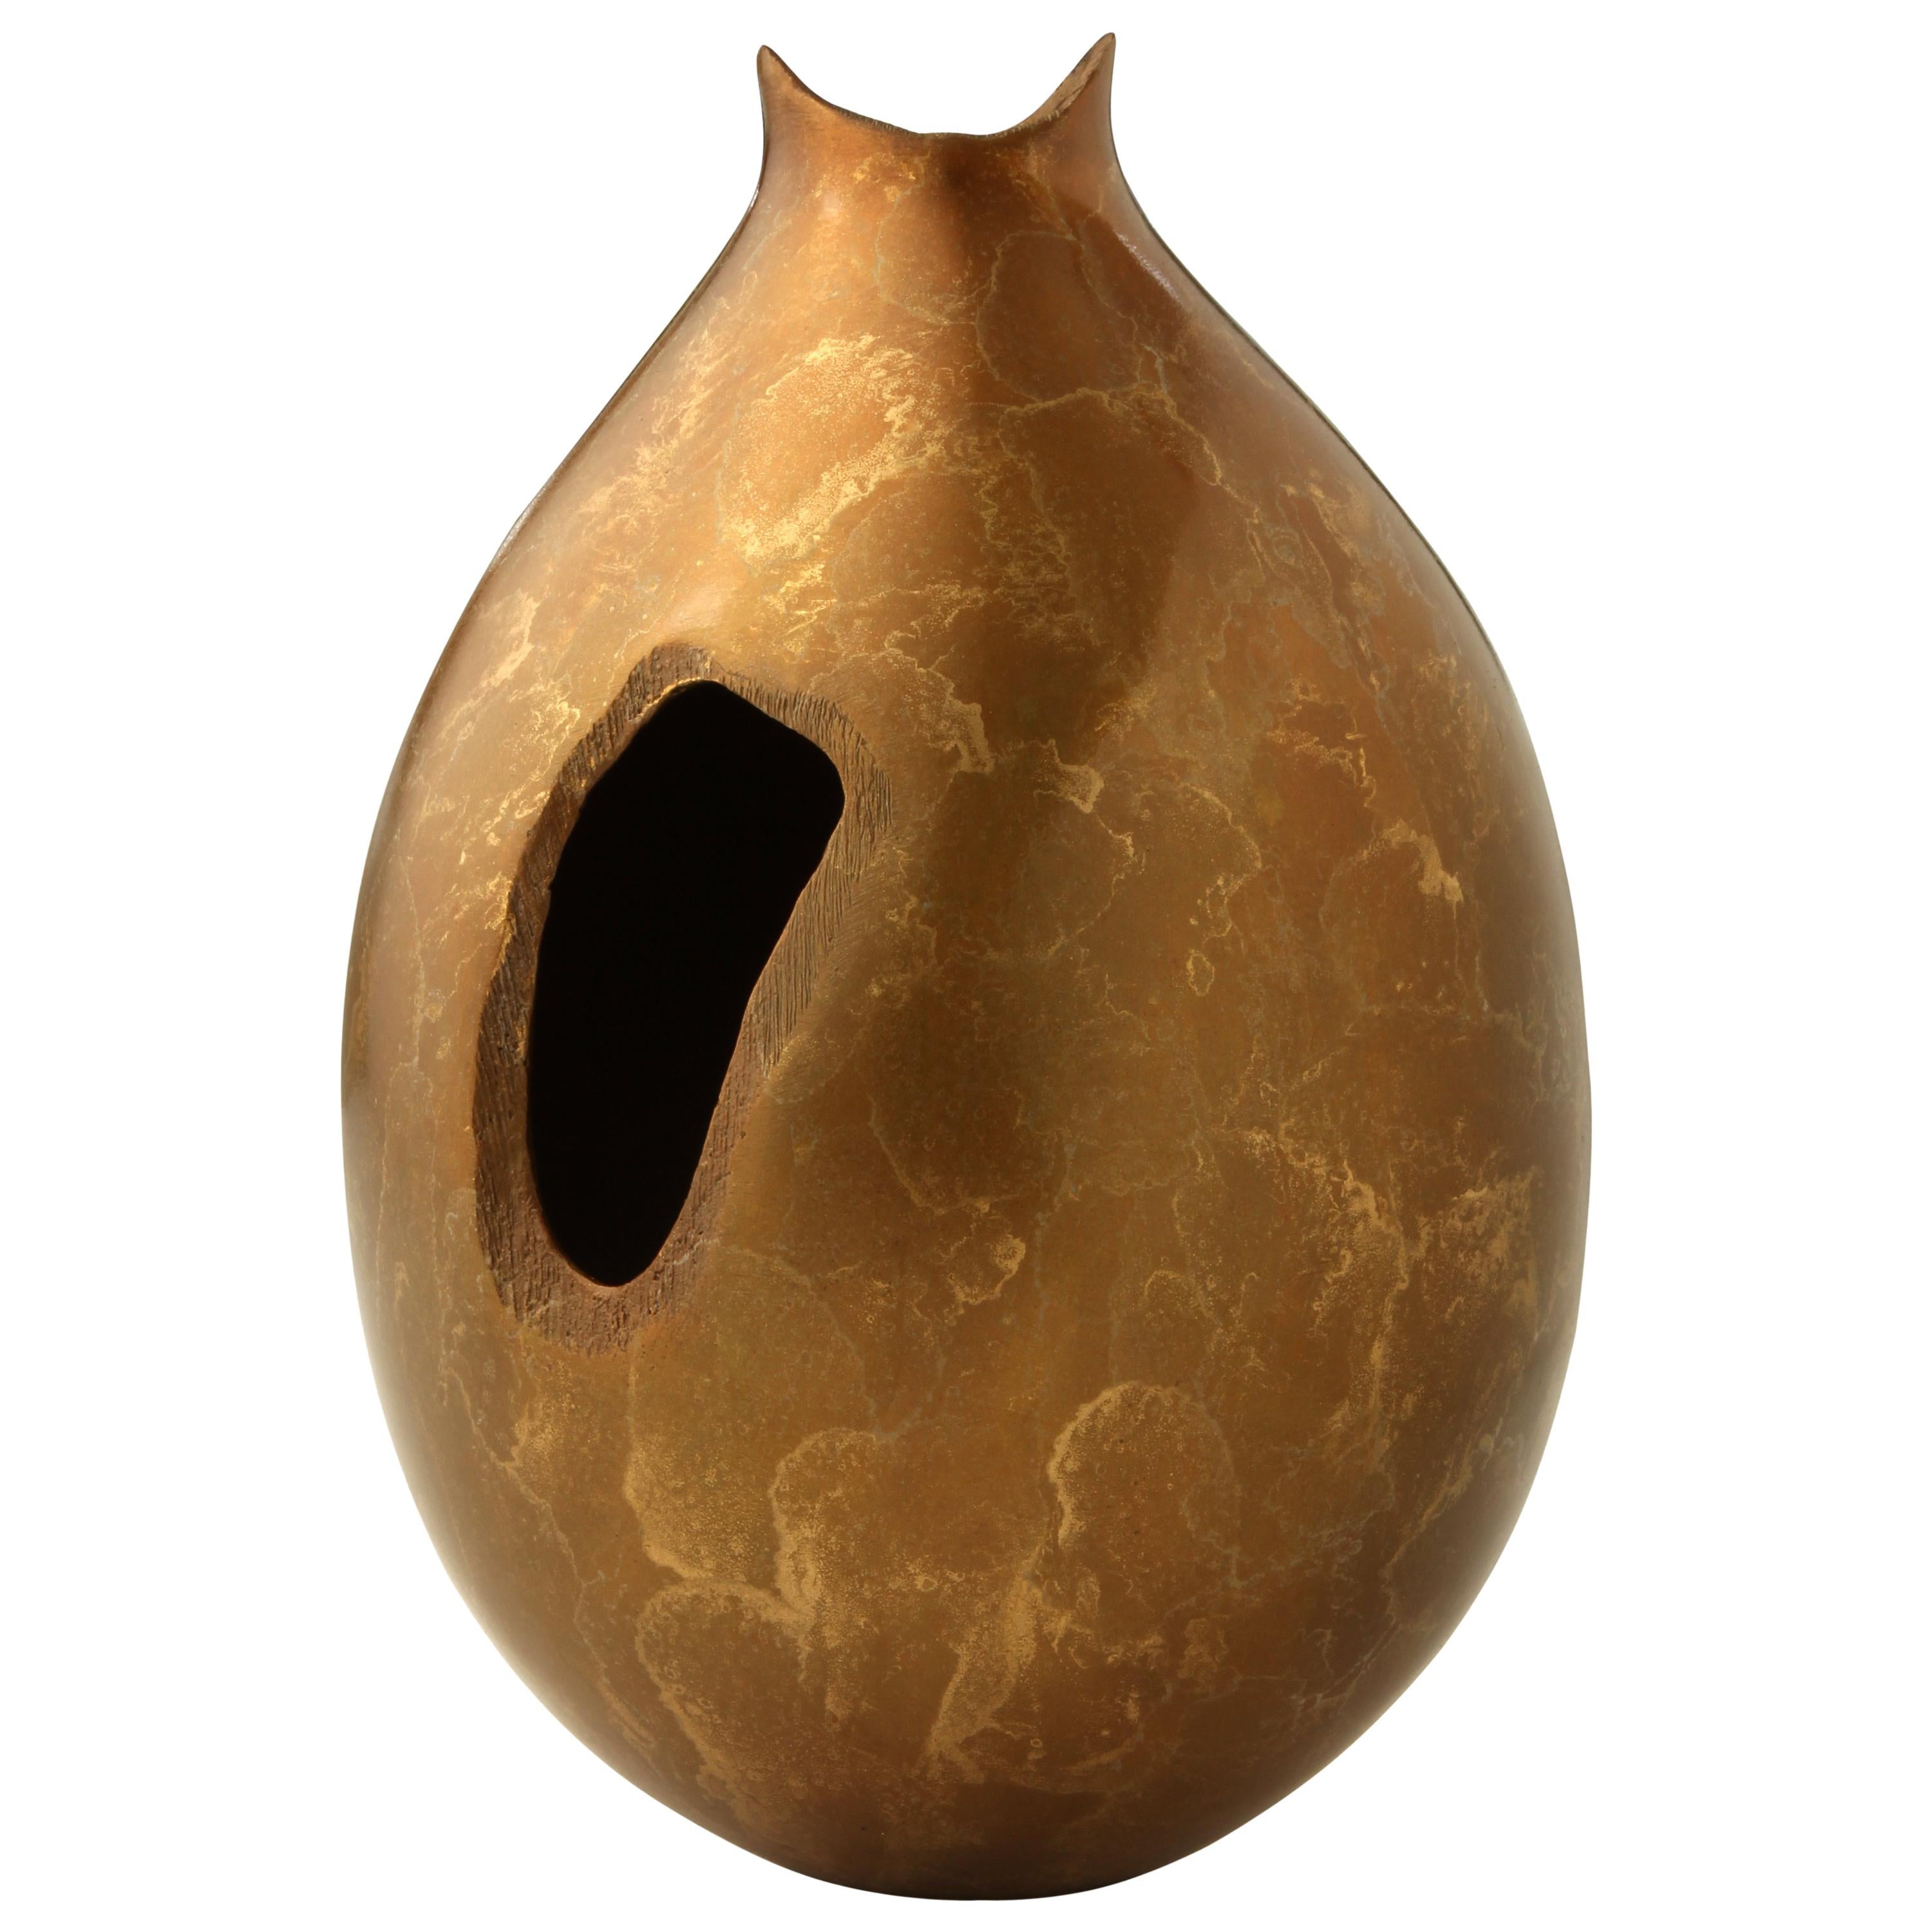 Solid Bronze "Aspen" Vase / Vessel with Organic Shape and Gold Patina, in Stock For Sale